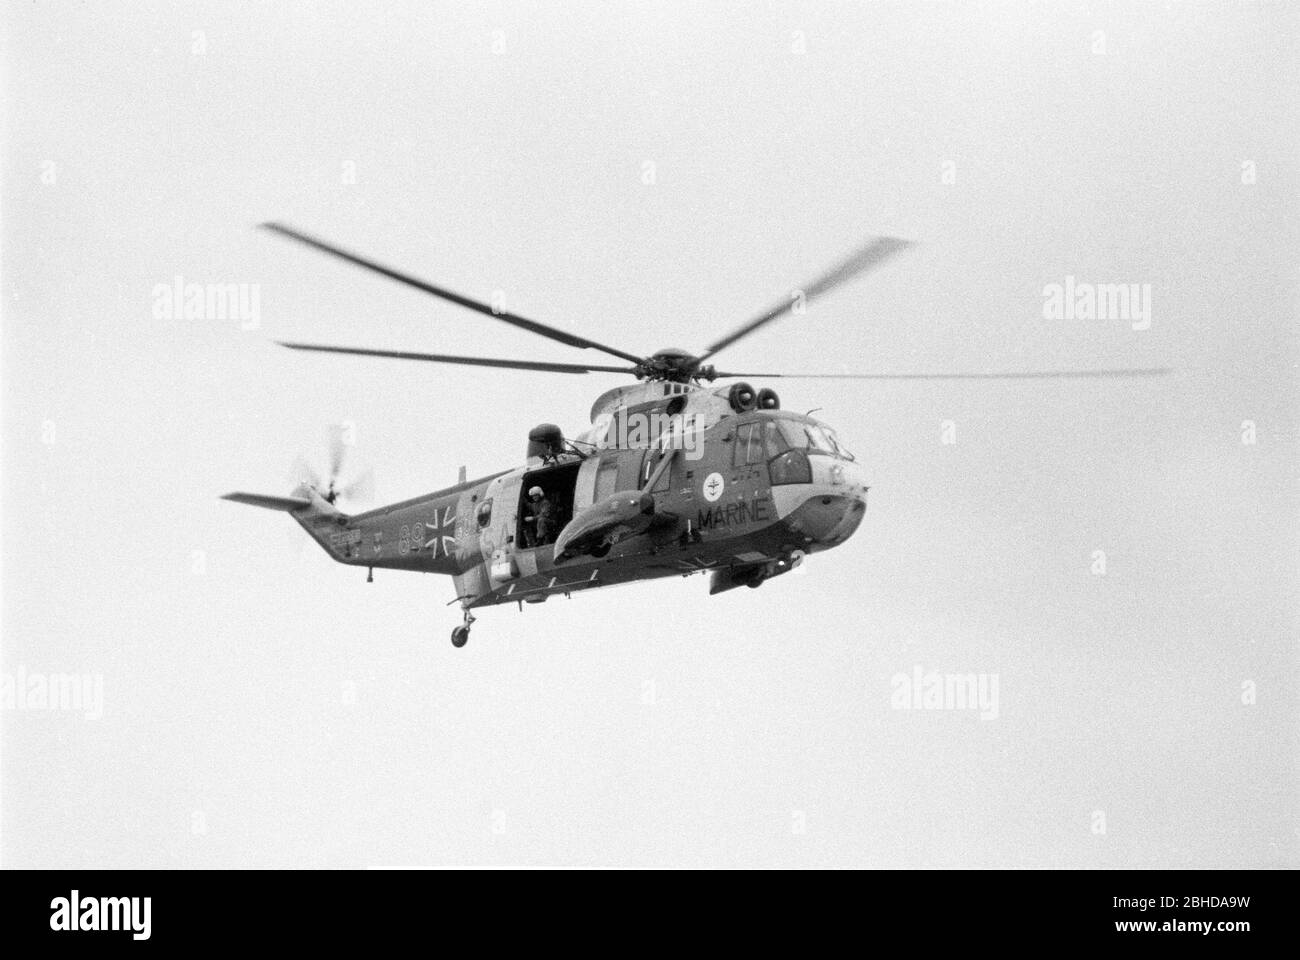 SAR Helicopter of the German Navy in a practice flight, August 22, 1981, Borkum Navy Base, Lower Saxony, Germany Stock Photo